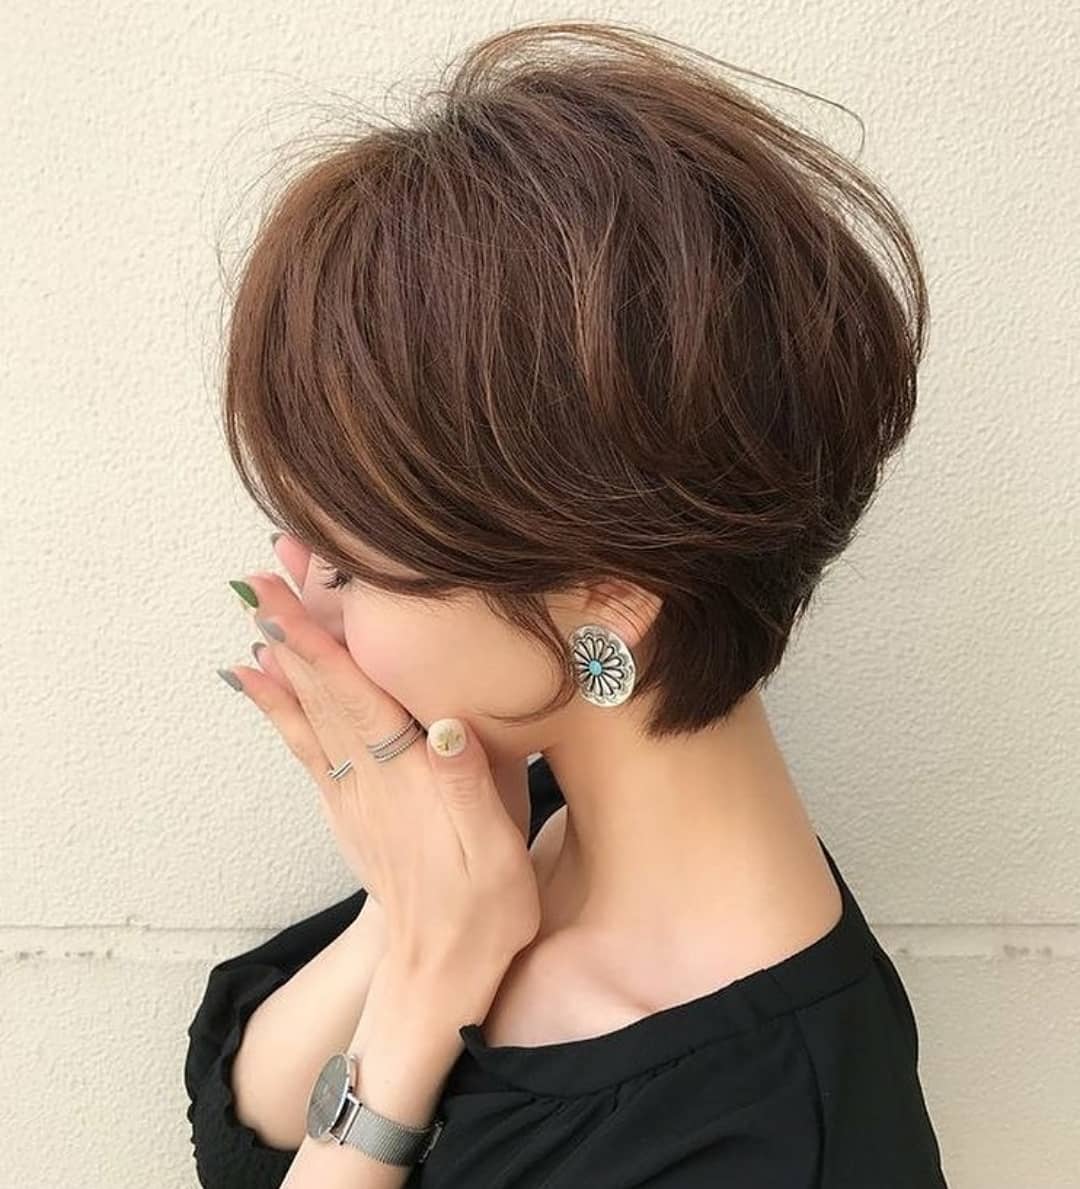 10 Cute Short Hairstyles And Haircuts For Young Girls Short Hair 2021